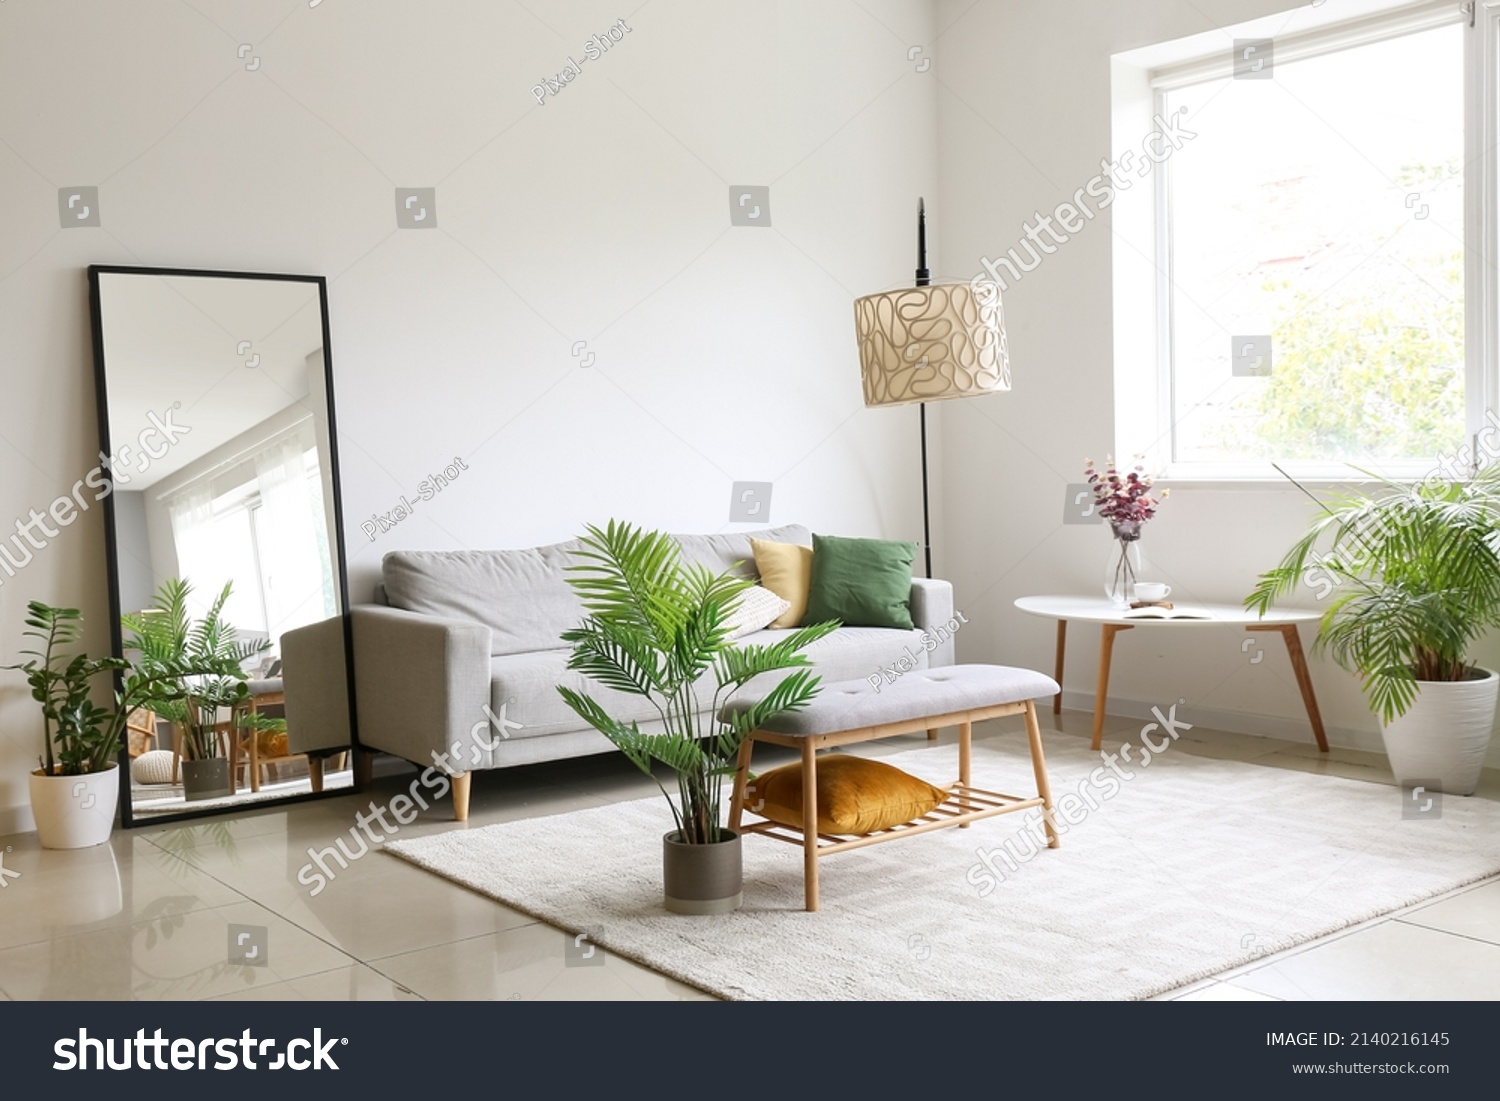 Interior of light living room with comfortable sofa, houseplants and mirror near light wall #2140216145